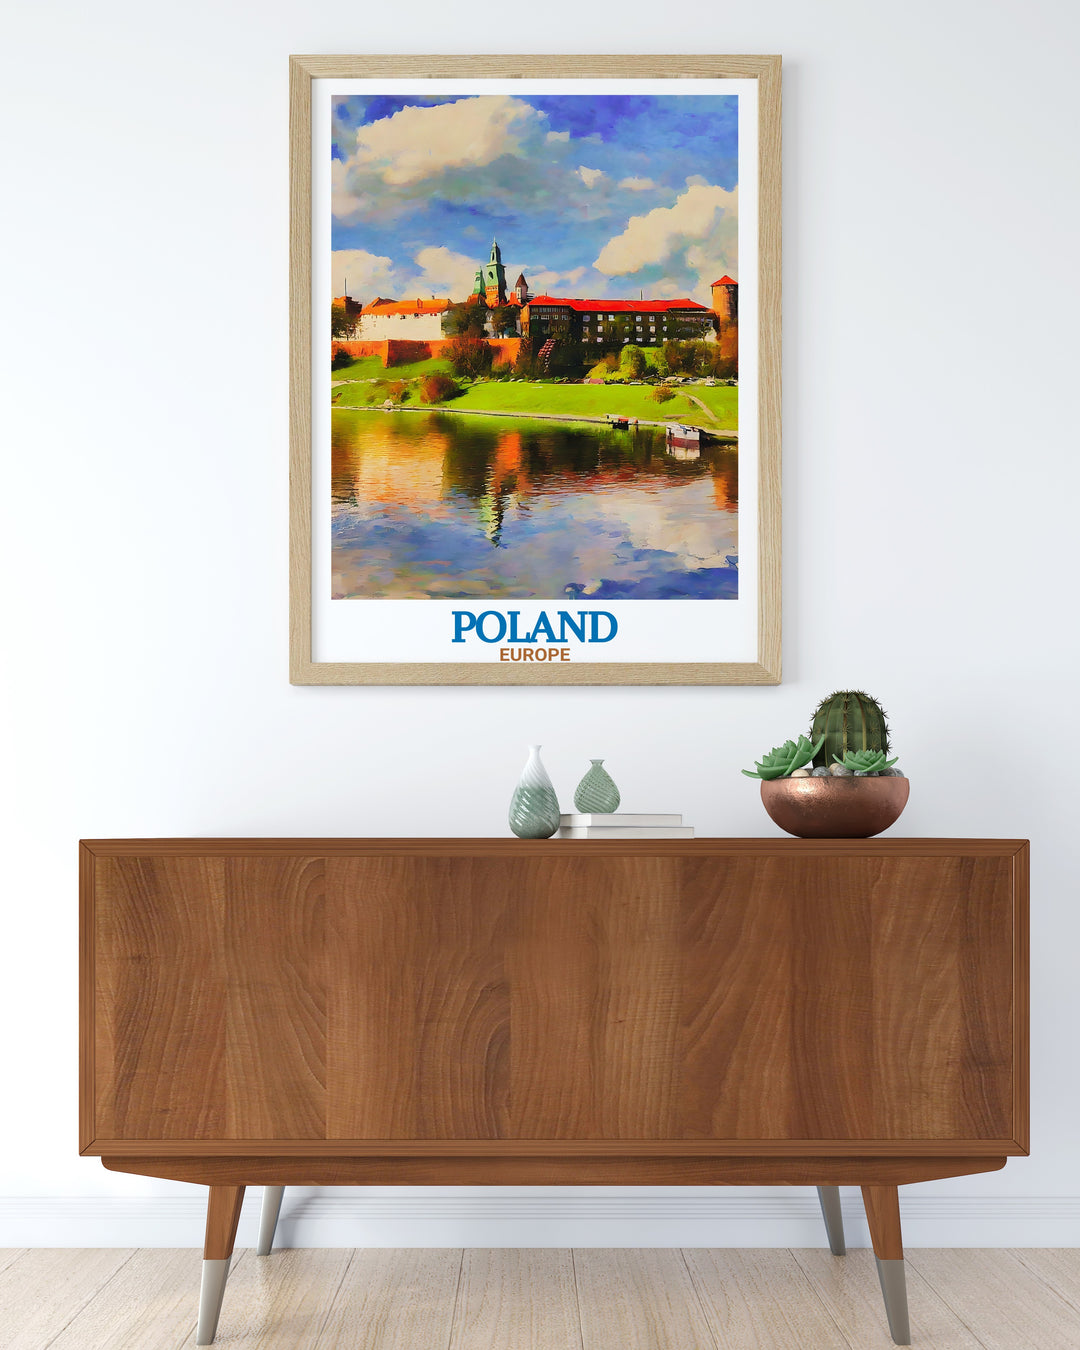 Wawel Castle Modern Prints and Zakopane City Map a beautiful combination of historical and cultural landmarks perfect for elegant home décor and thoughtful gifts brings the beauty of Poland into your home